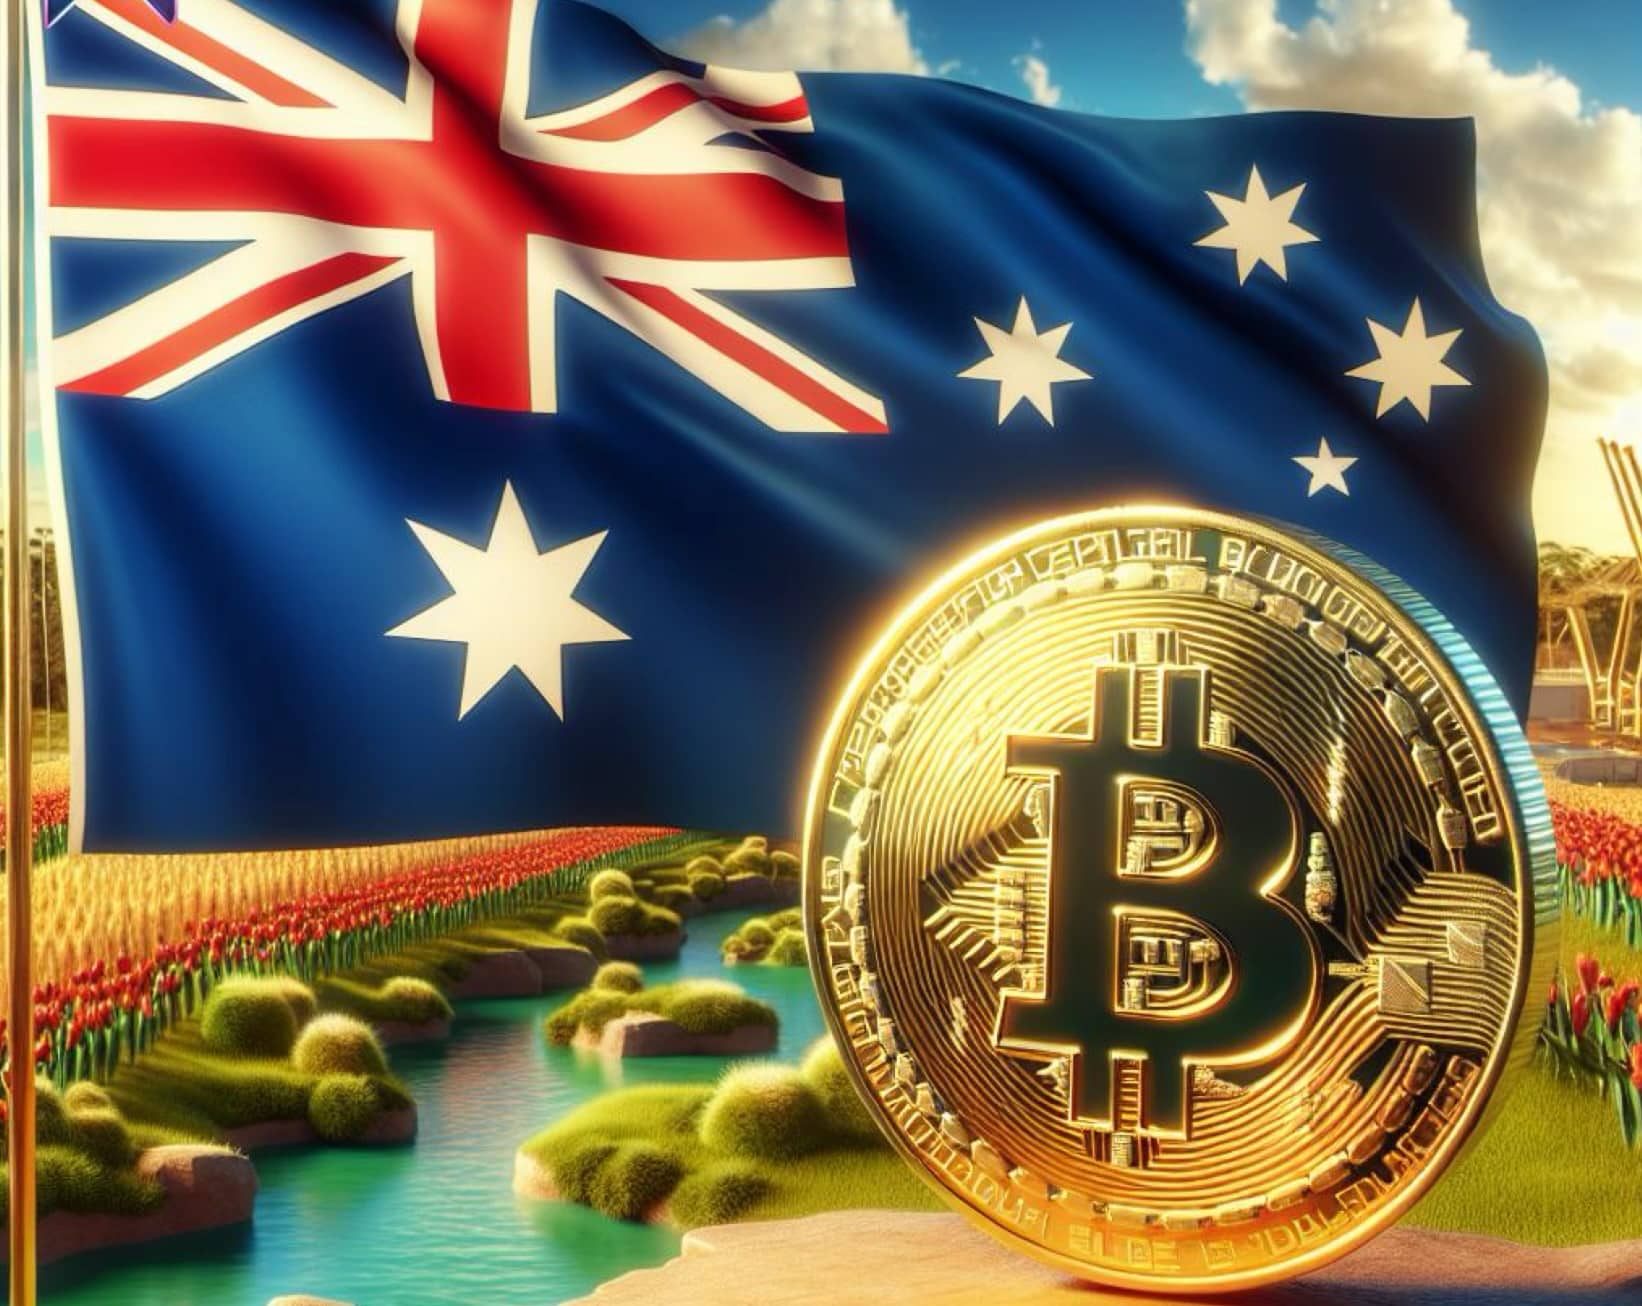 With the crypto industry booming in Australia, regulators are introducing new laws to stop people from losing money they don't have.